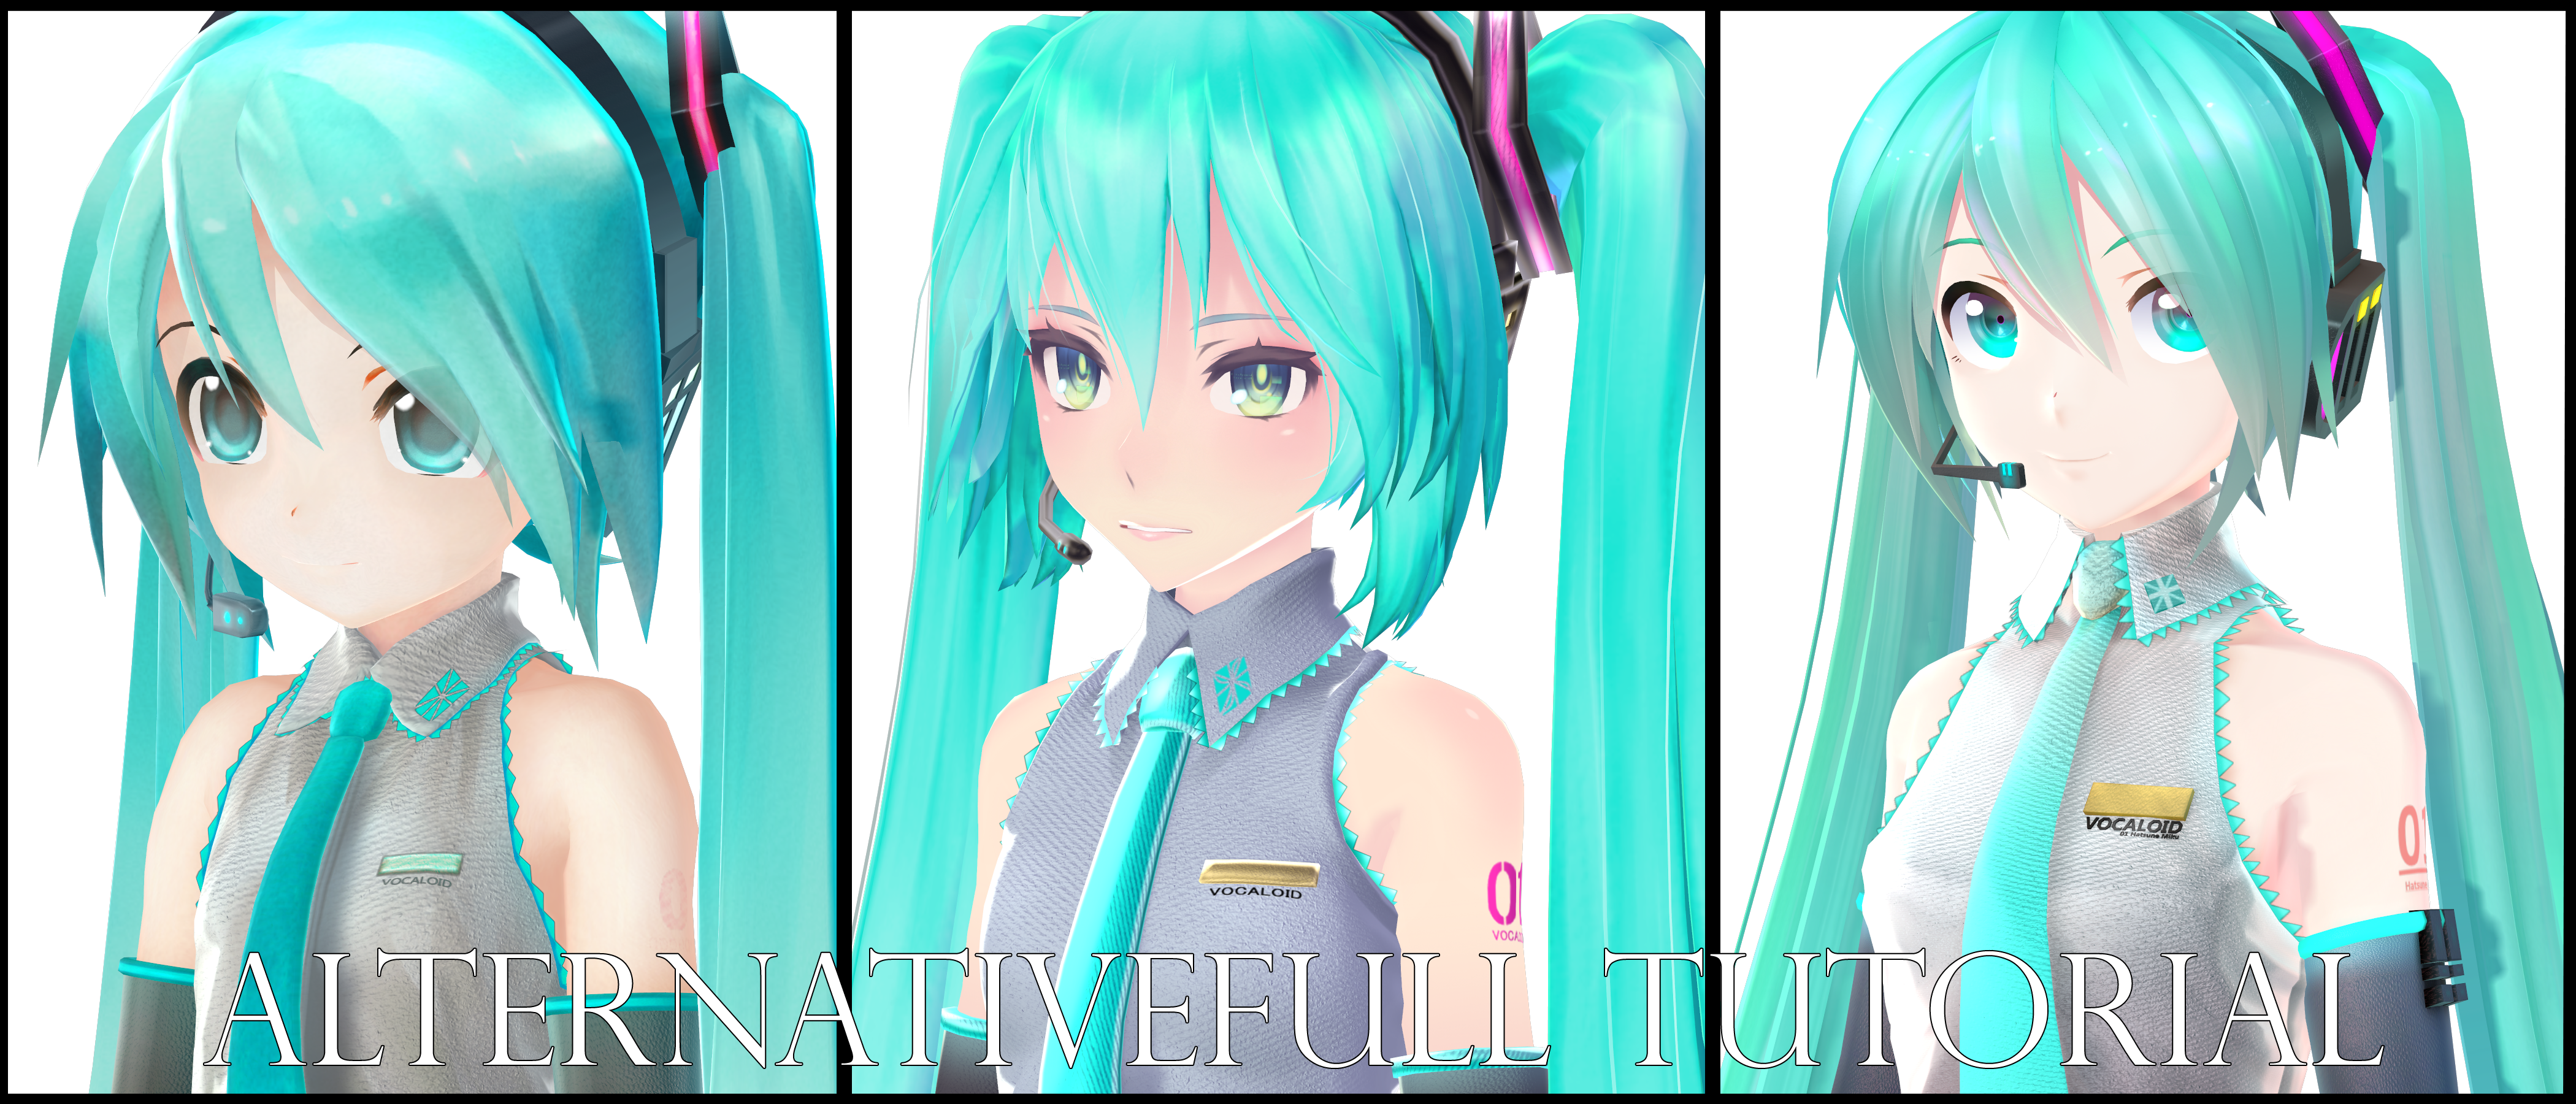 Gallery of Mmd Shaders Dl.